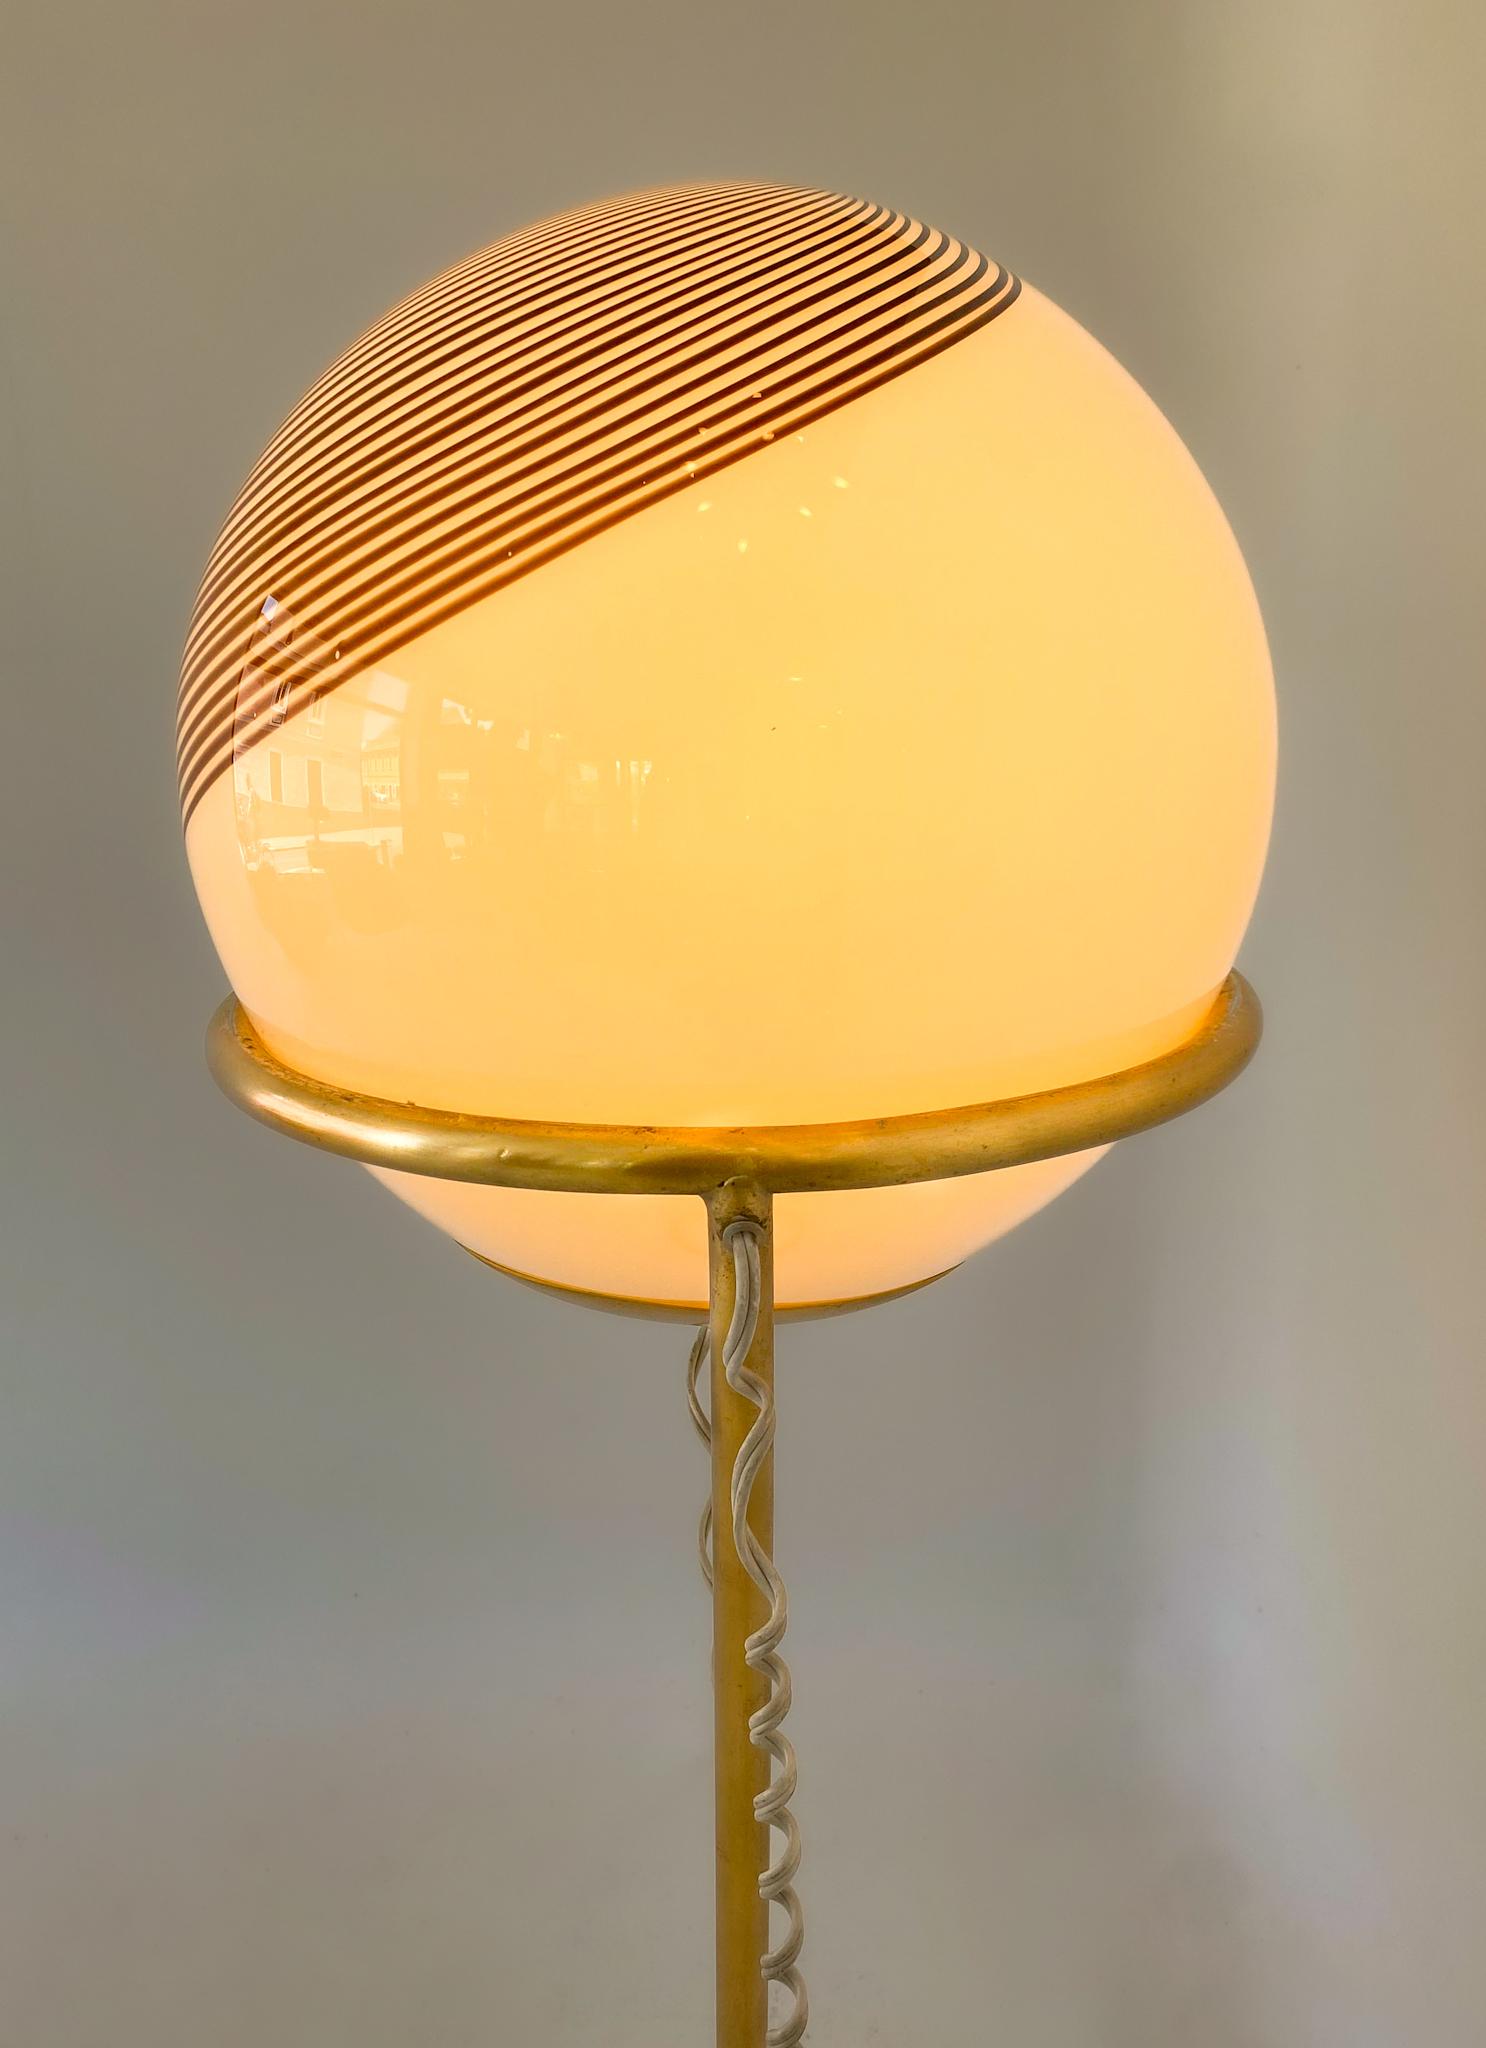 Mid-Century Modern Murano Glass Brass Floor Lamp attr. to Venini, Italy 1960s For Sale 4